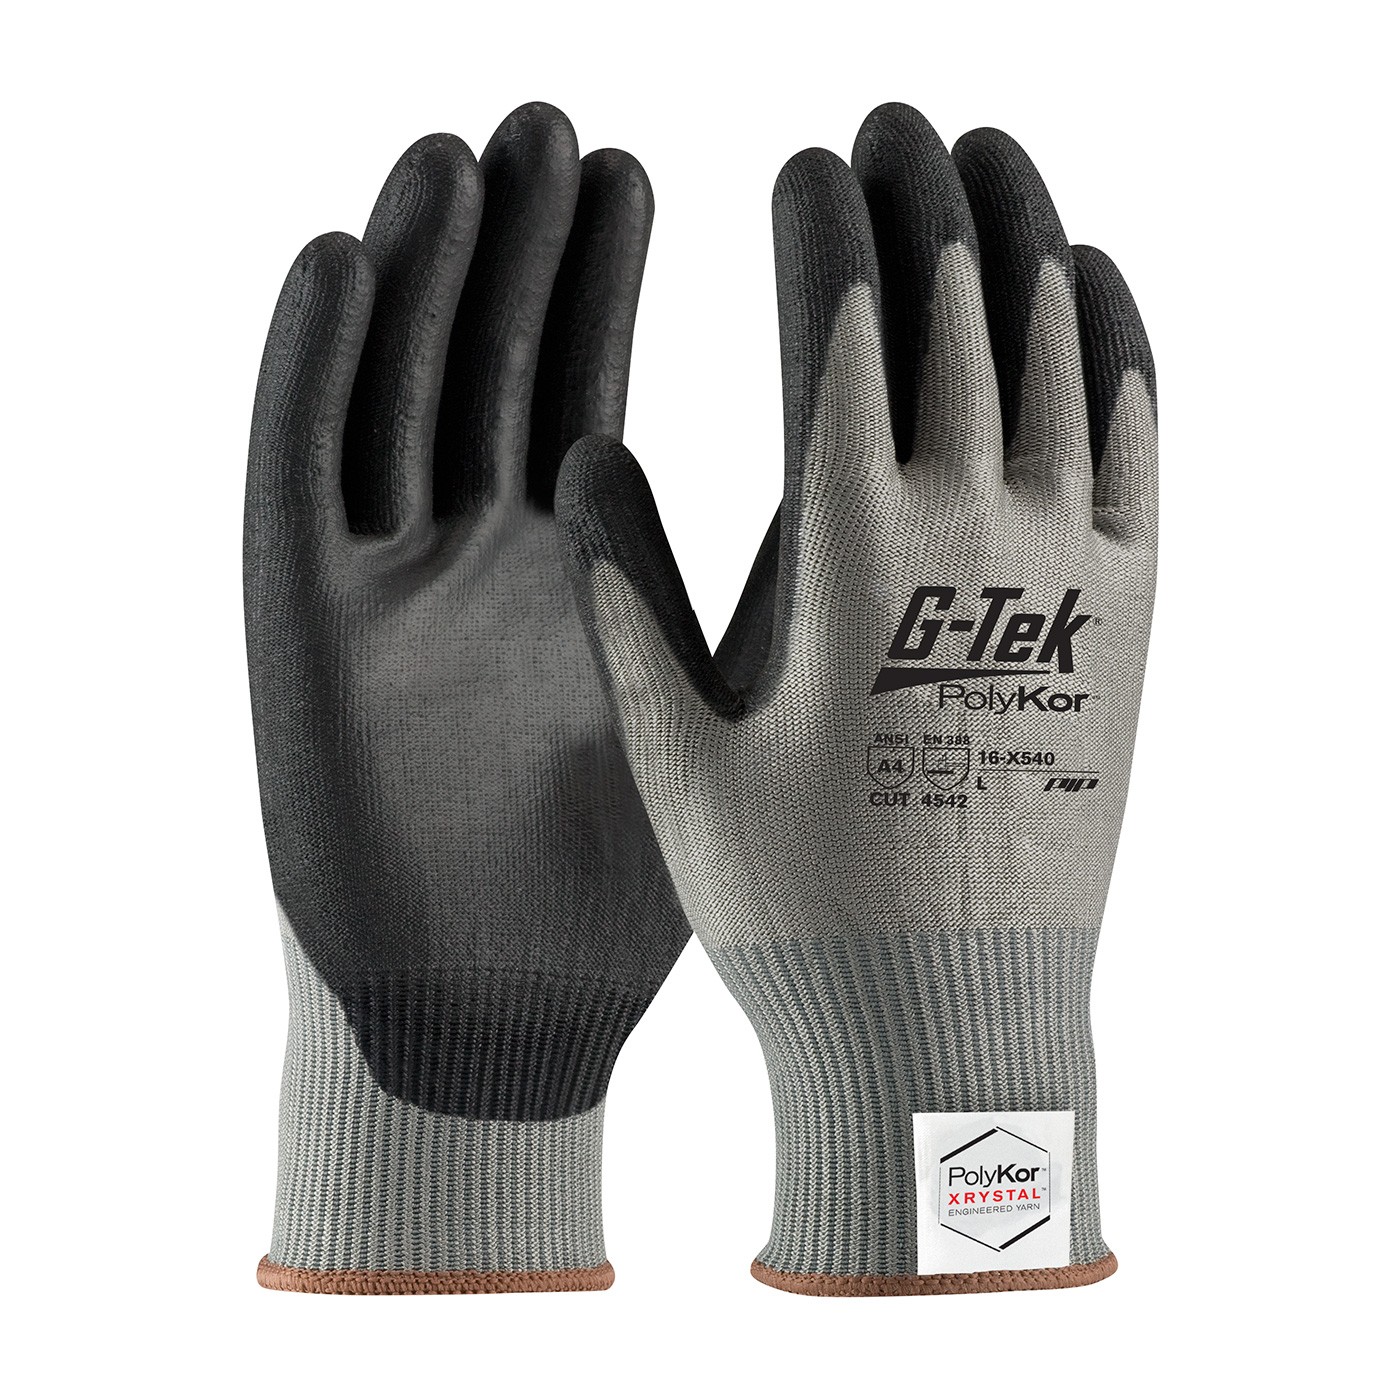 G-Tek® PolyKor® Xrystal® Seamless Knit PolyKor® Xrystal® Blended Glove with Polyurethane Coated Smooth Grip on Palm & Fingers  (#16-X540)